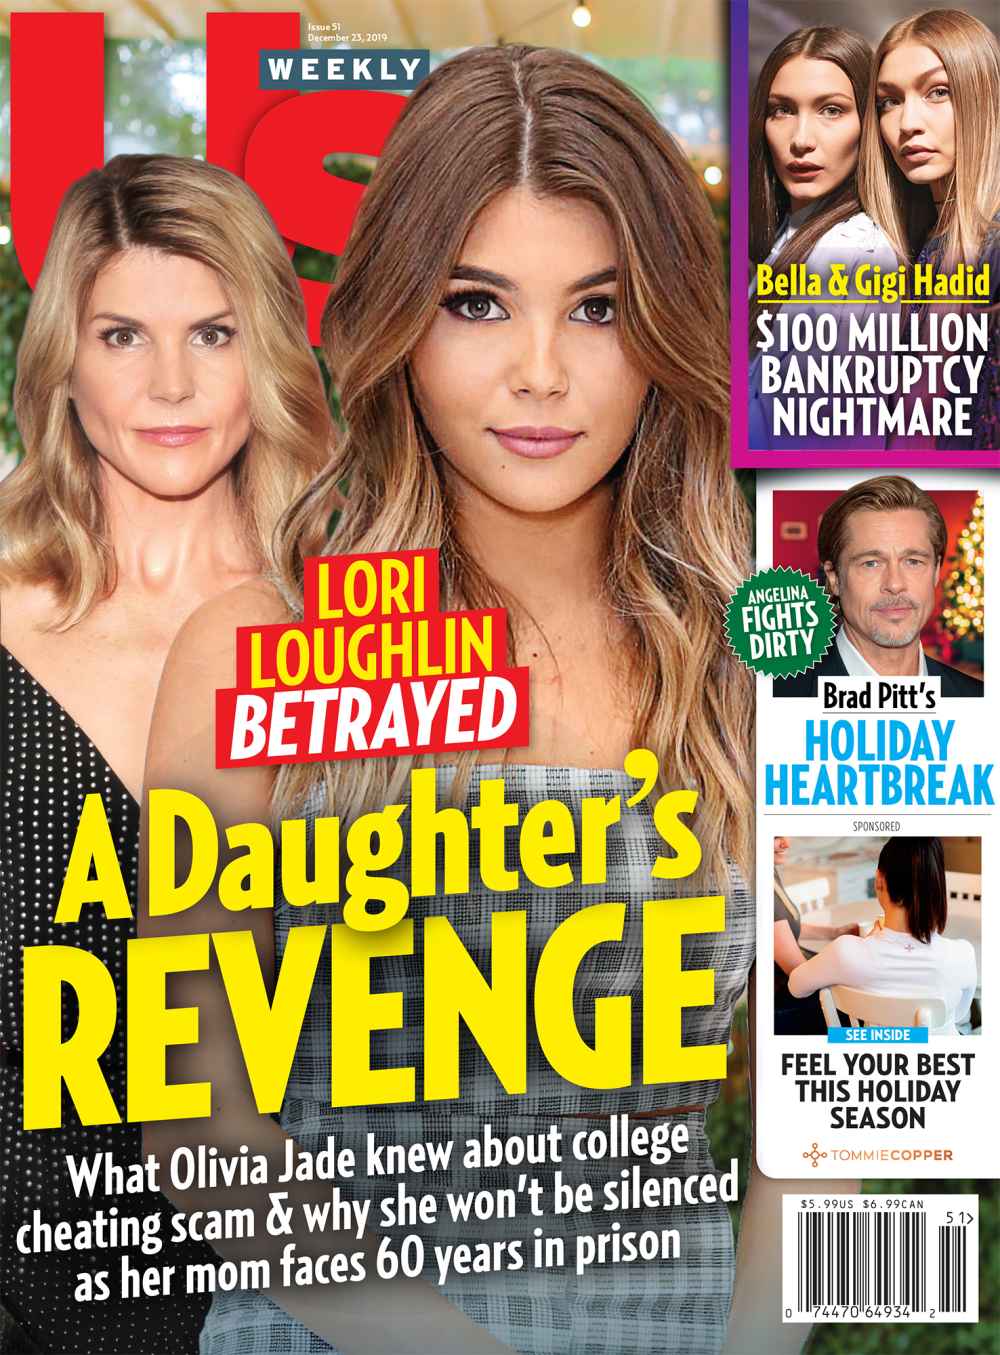 US Weekly Cover 5119 Brad Pitt Is Not Expecting to See Maddox Pax Zahara Over the Holidays